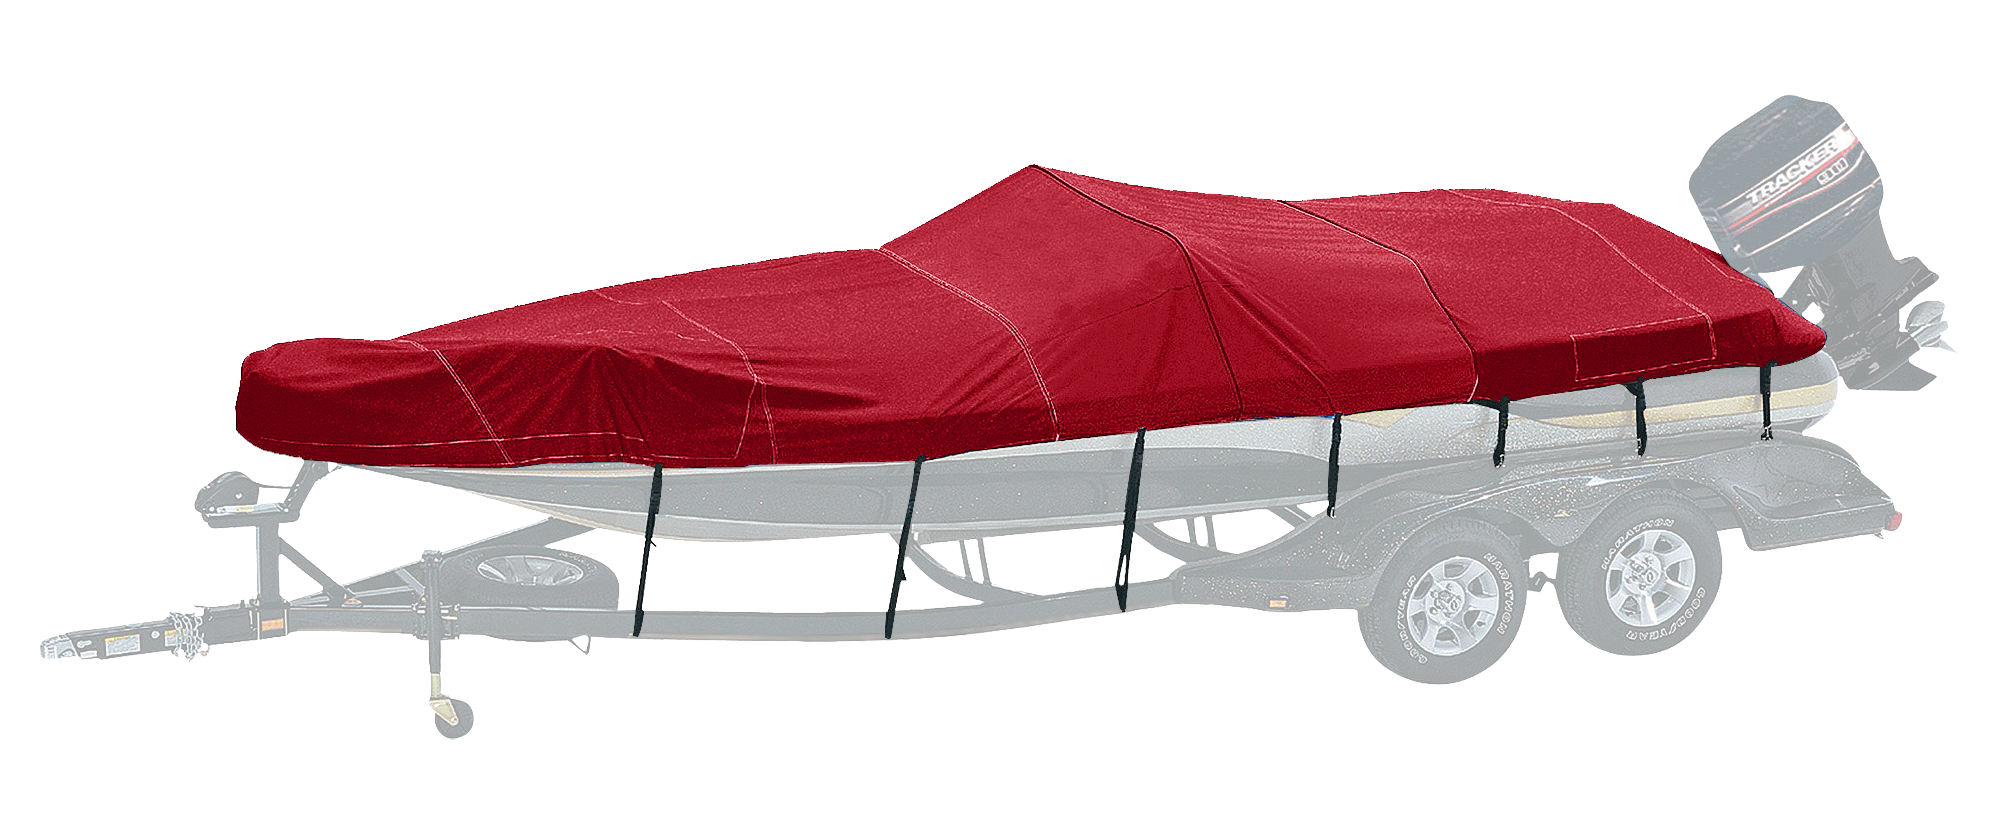 Bass Pro Shops Exact Fit Boat Cover by Westland - Tahoe Boats - 2005 228 Deckboat I/O - Burgundy